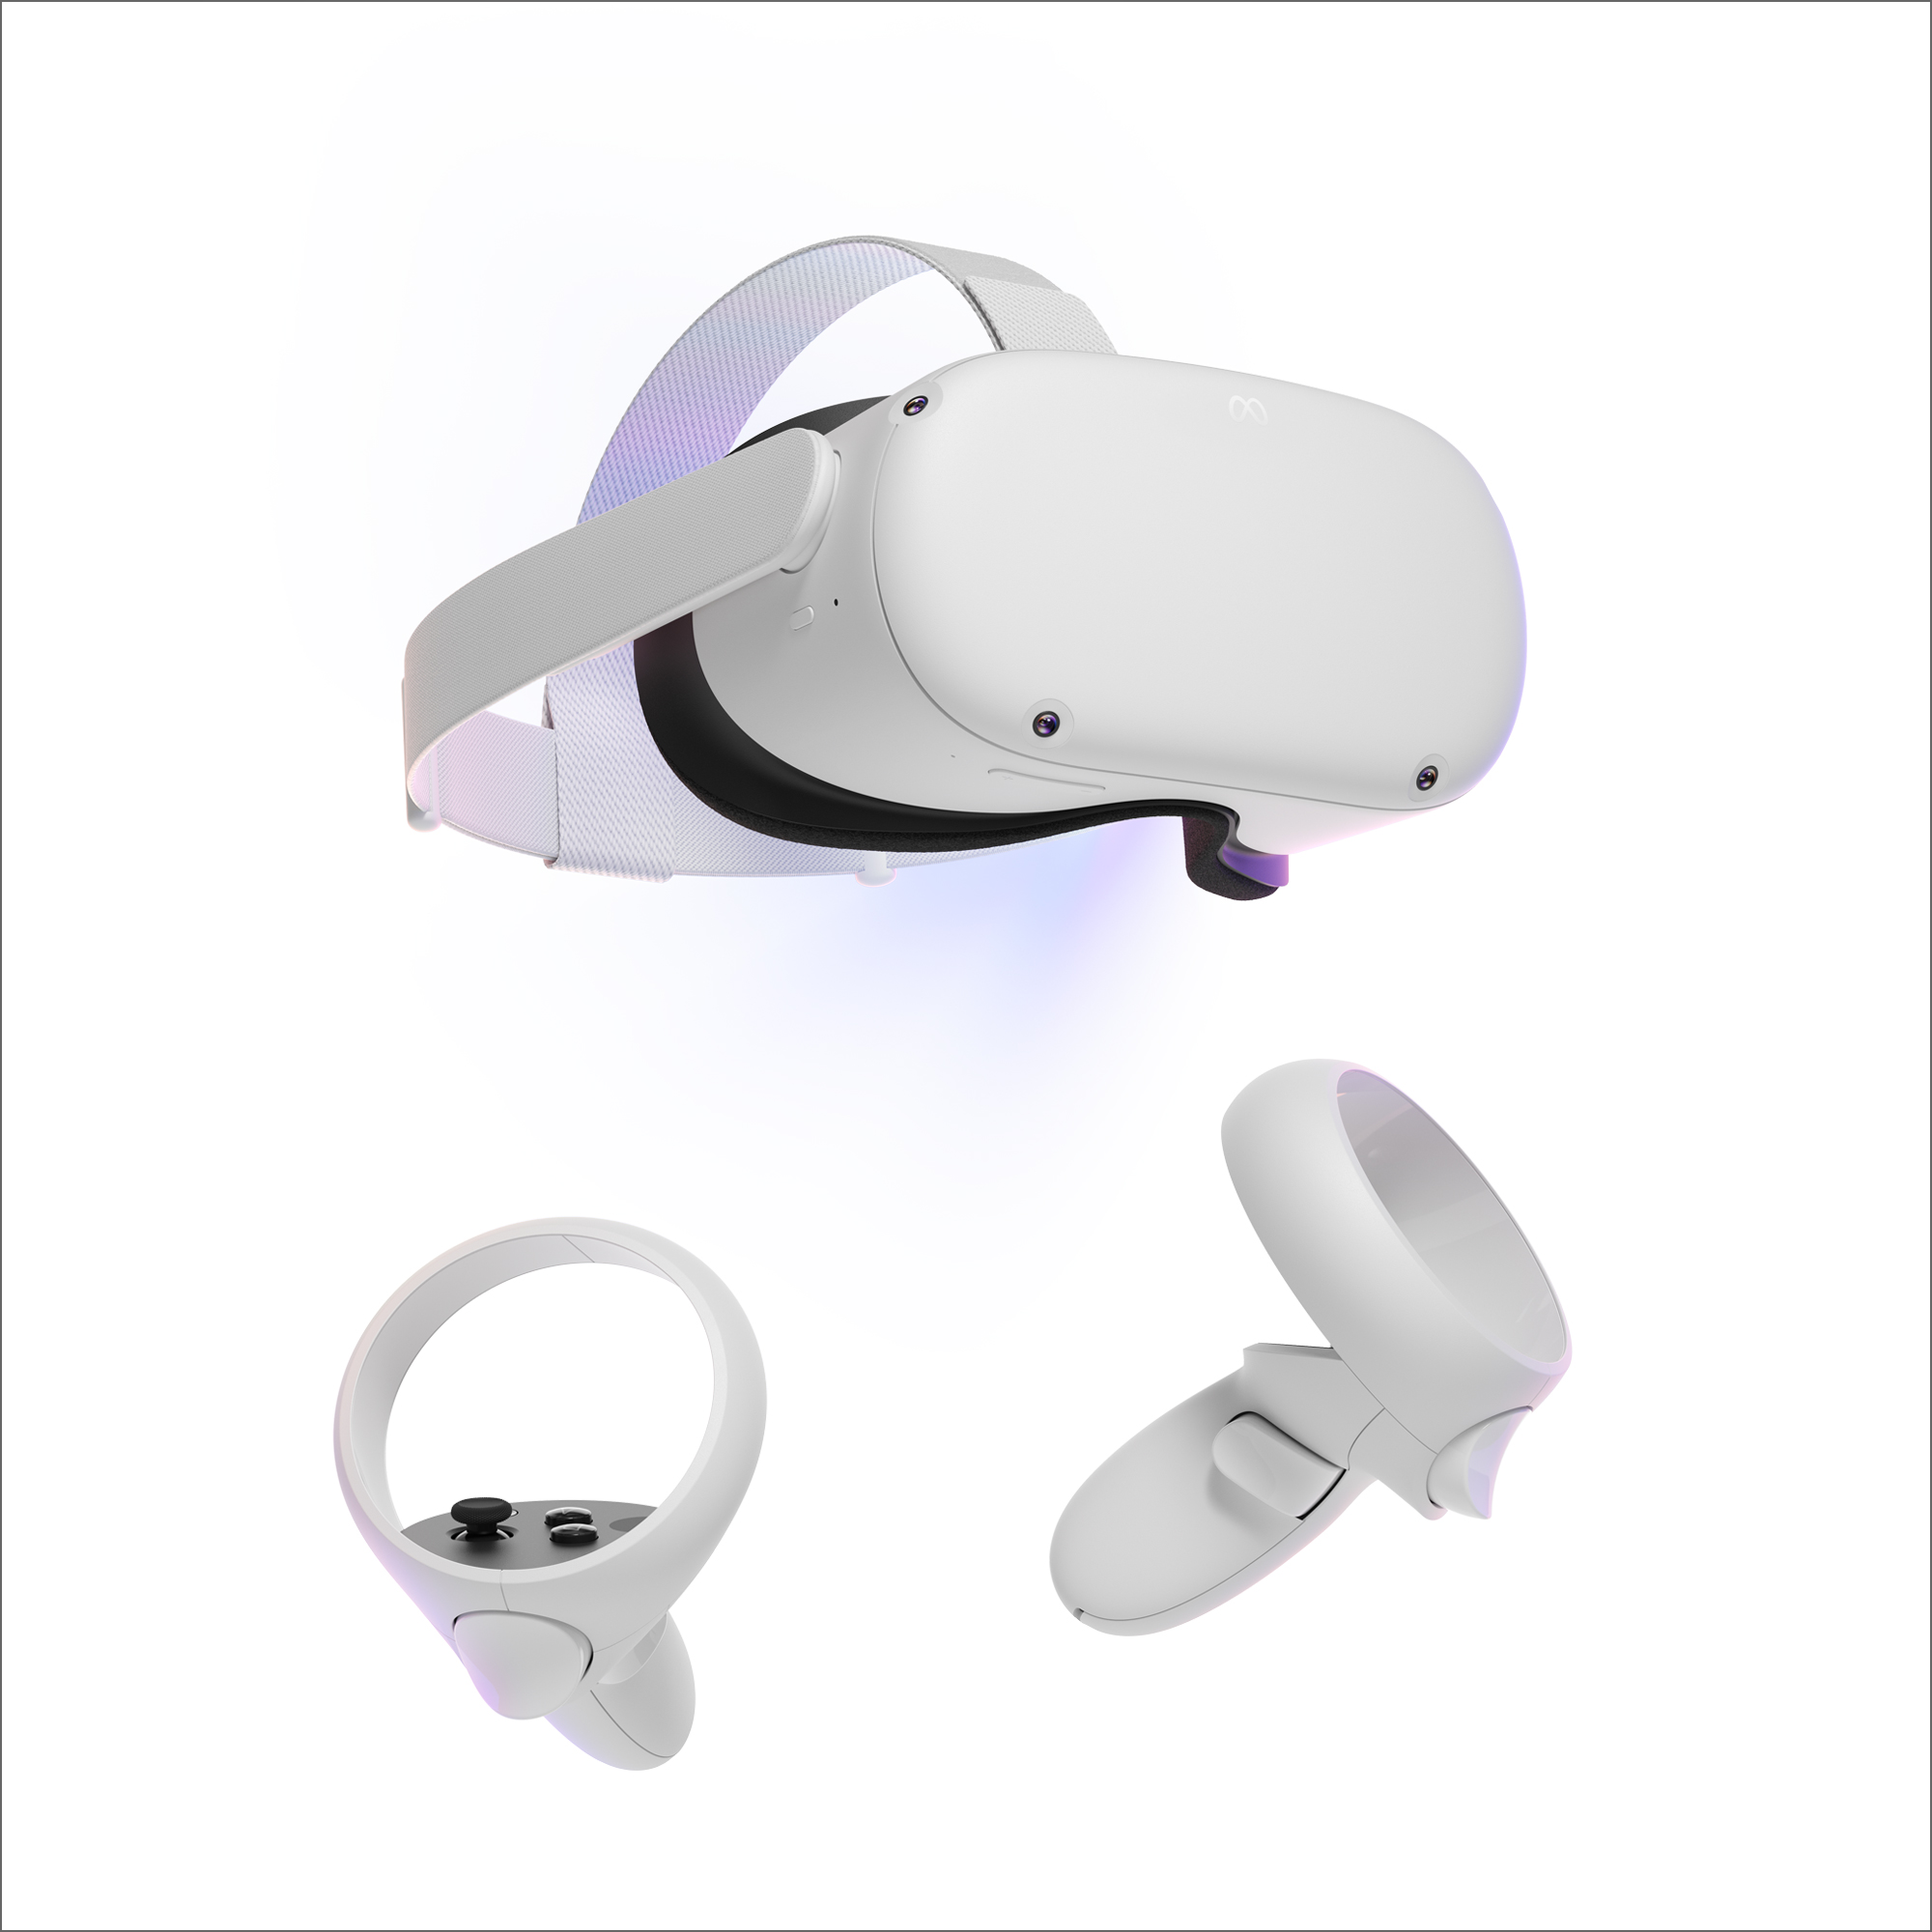 Restored Oculus Quest 2 — Advanced All-In-One Virtual Reality Headset — 64GB (Refurbished) - image 3 of 8